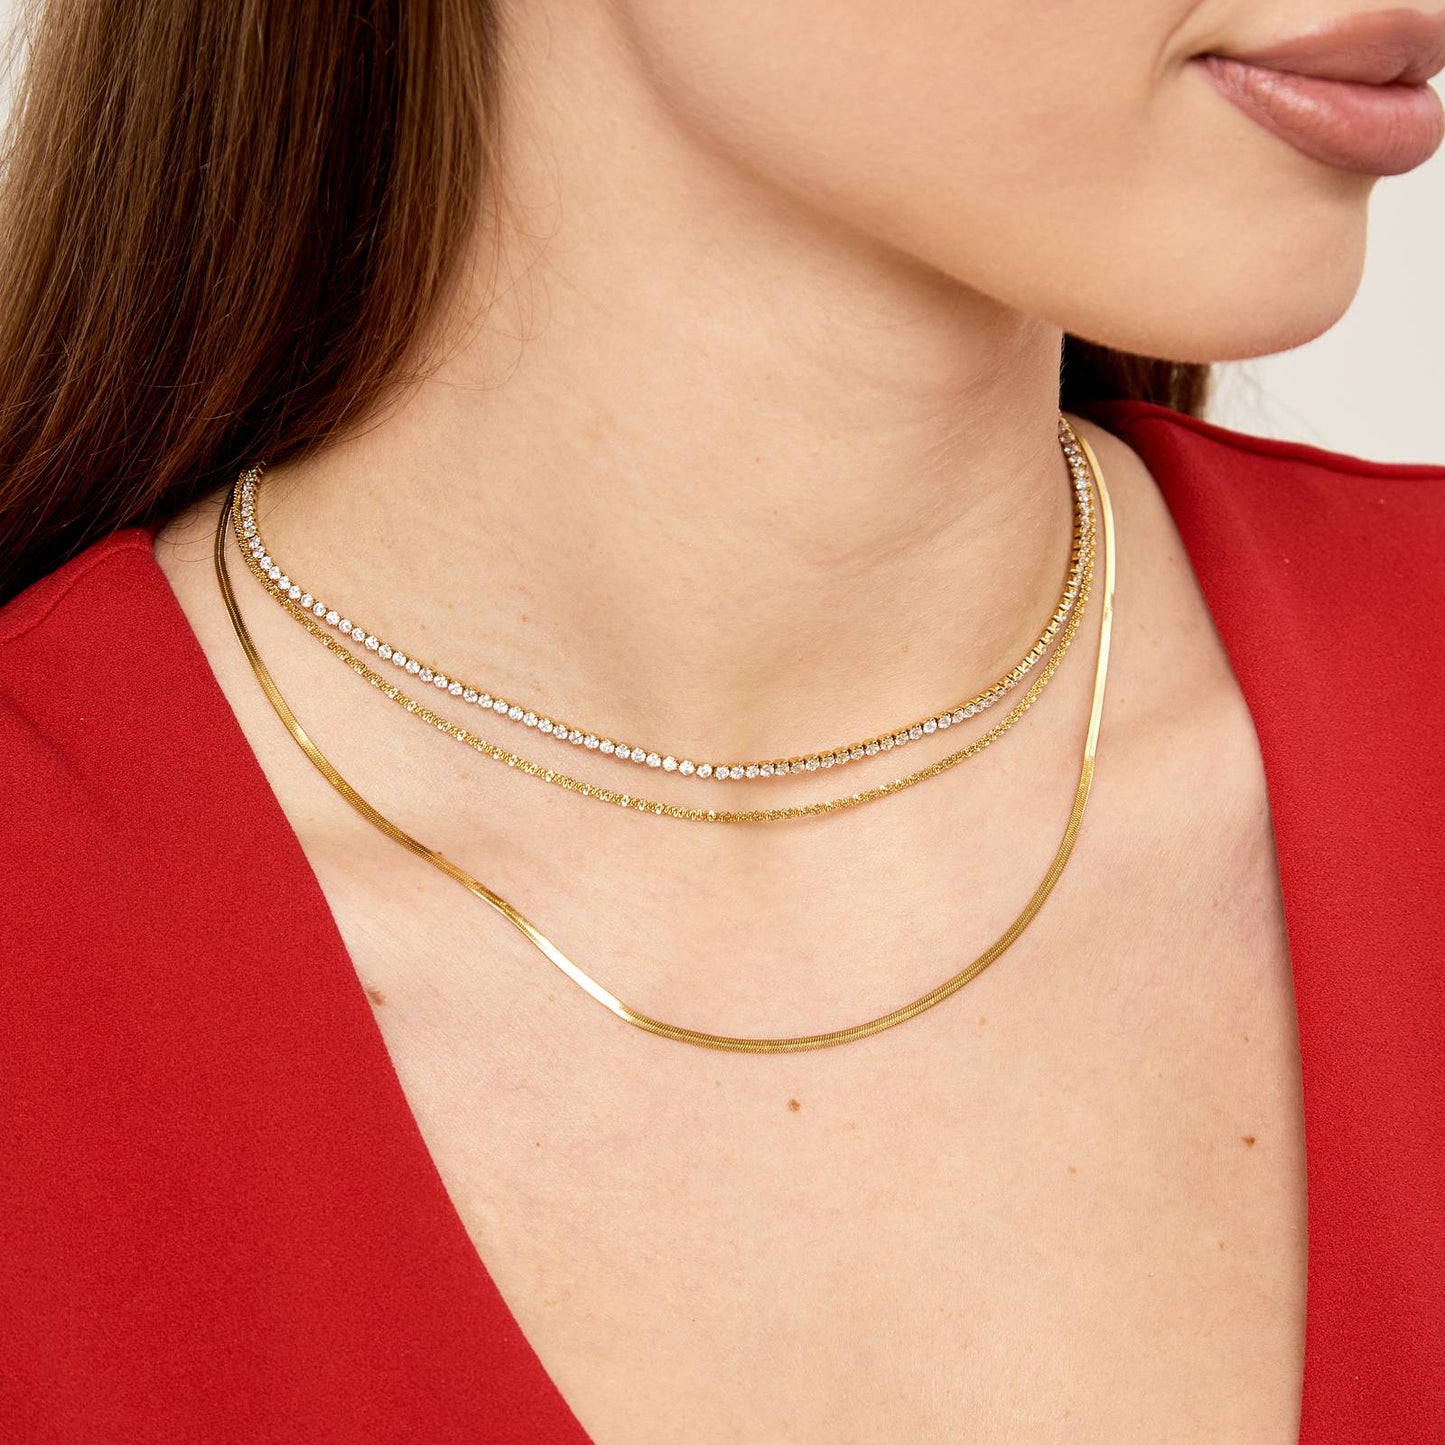 18K GOLD PLATED STAINLESS STEEL NECKLACE